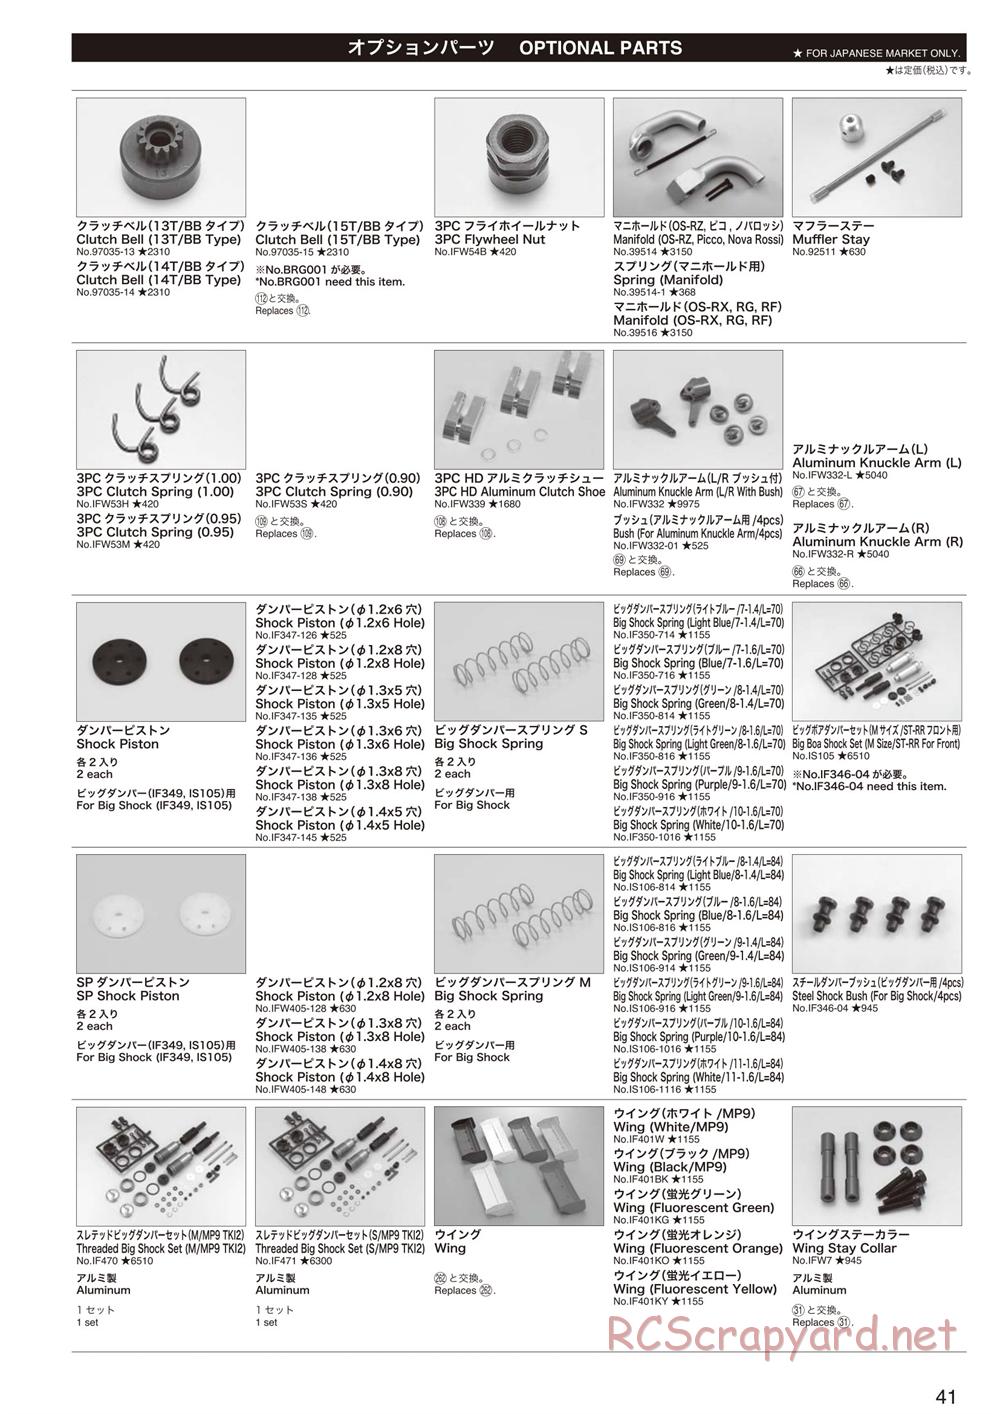 Kyosho - Inferno Neo 2.0 - Parts List - Page 4